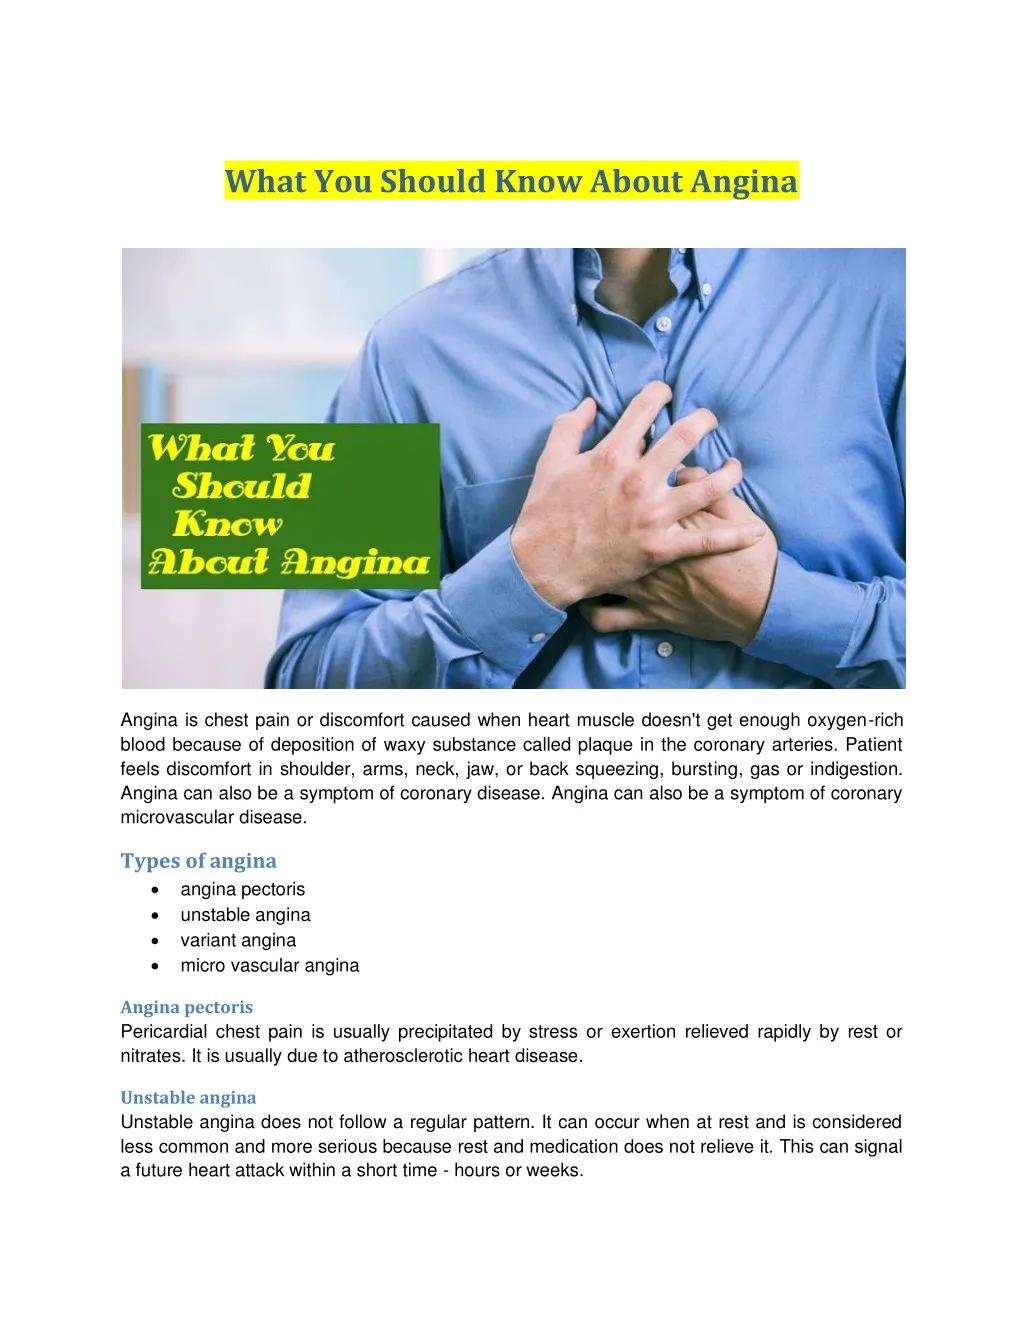 what you should know about angina